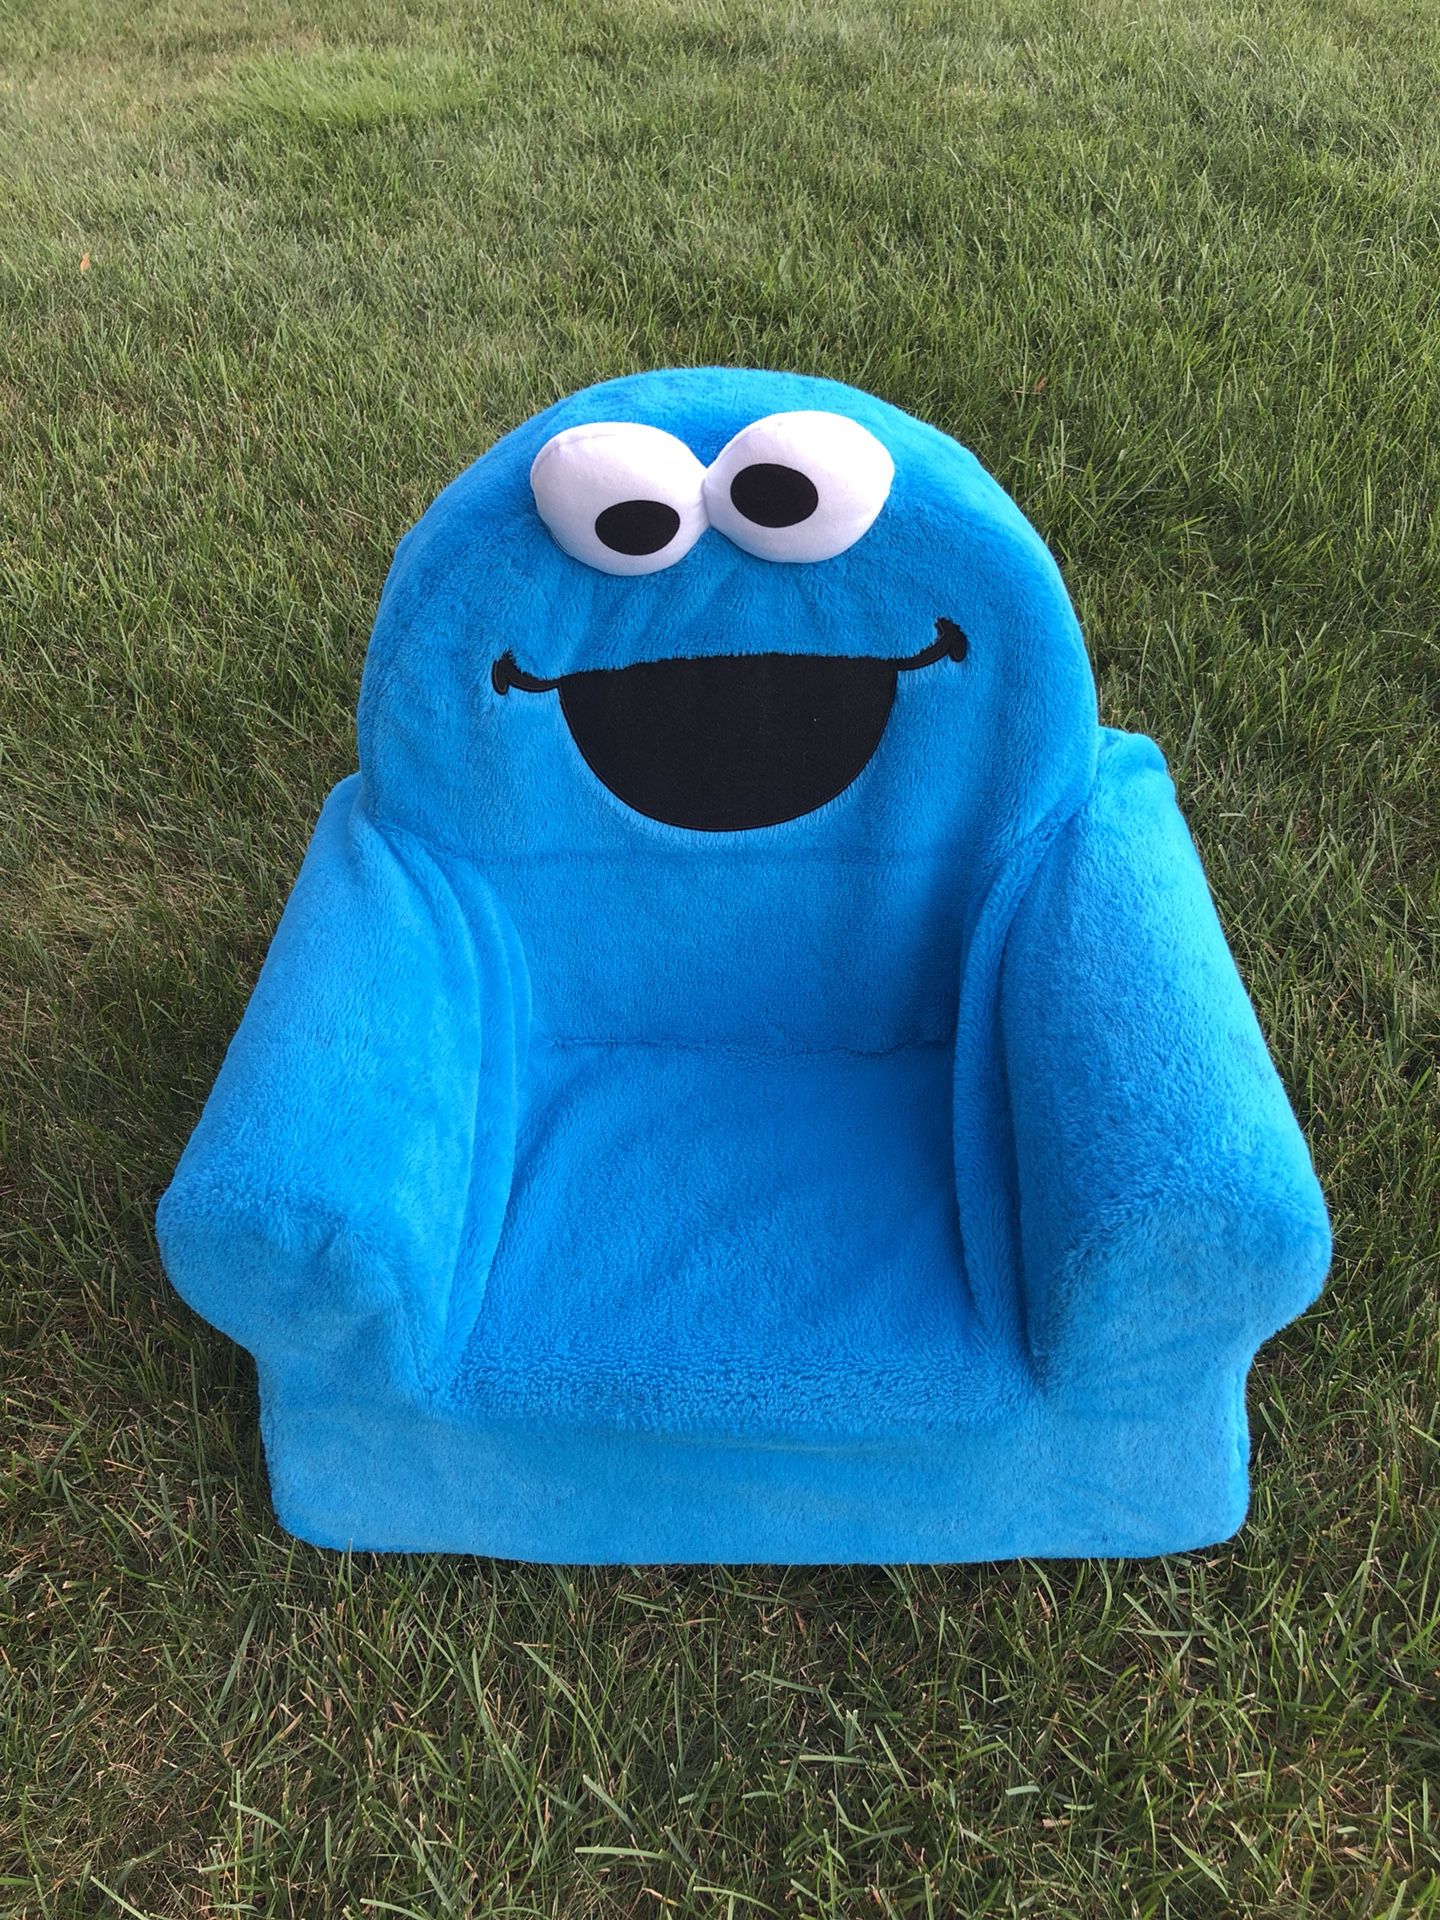 Cookie Monster Marshmallow Comfy Chair For Sale In Attleboro